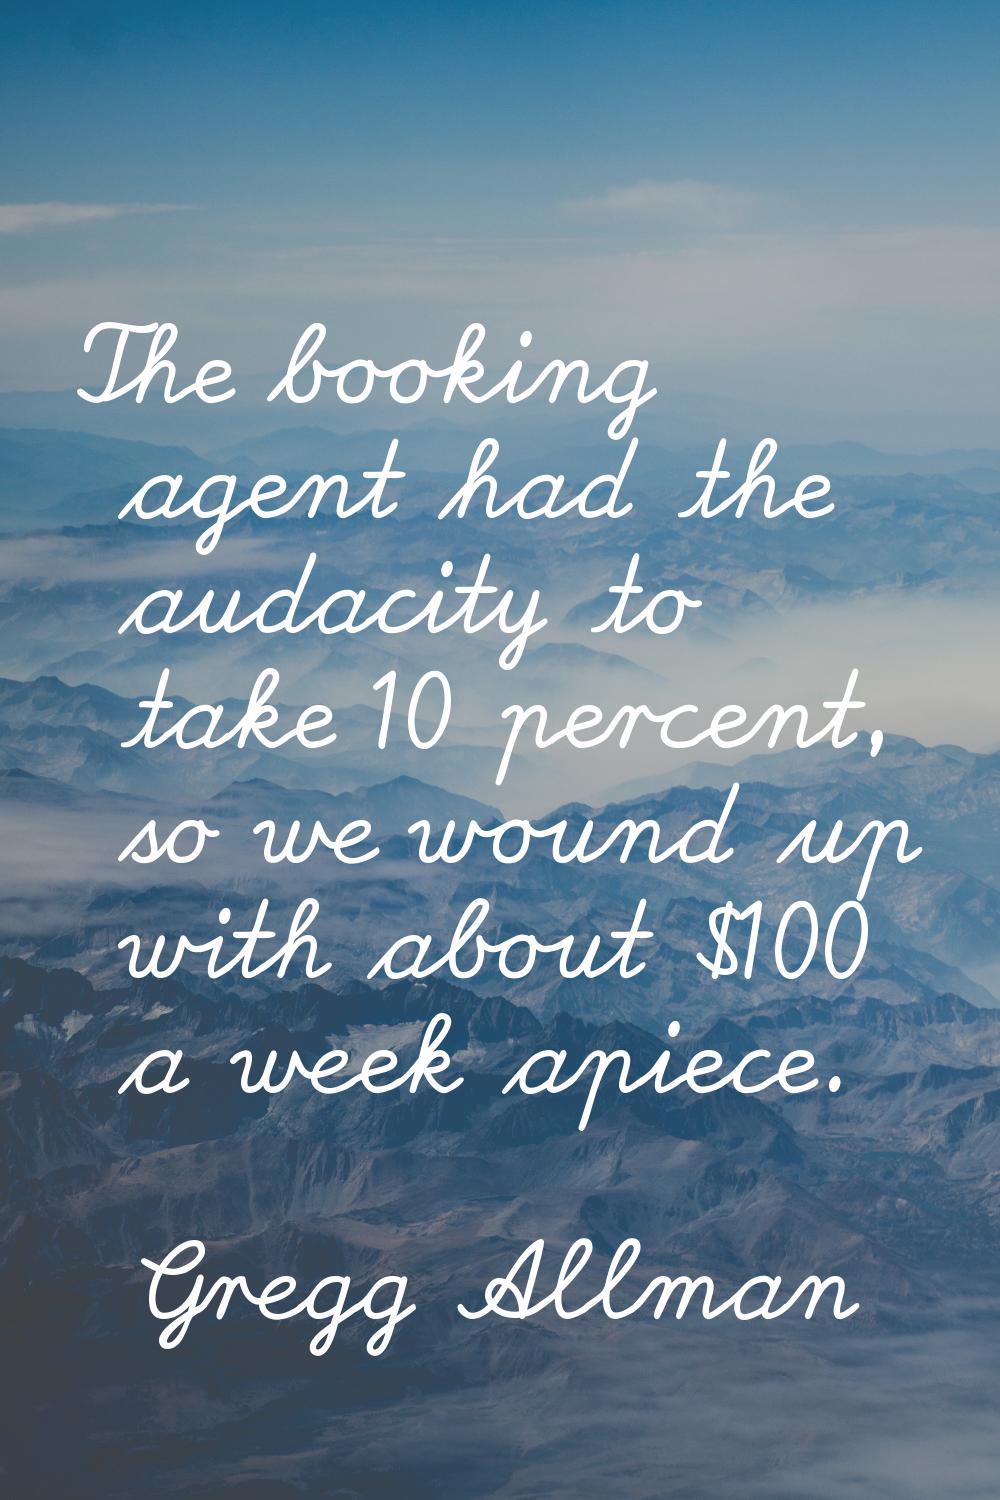 The booking agent had the audacity to take 10 percent, so we wound up with about $100 a week apiece